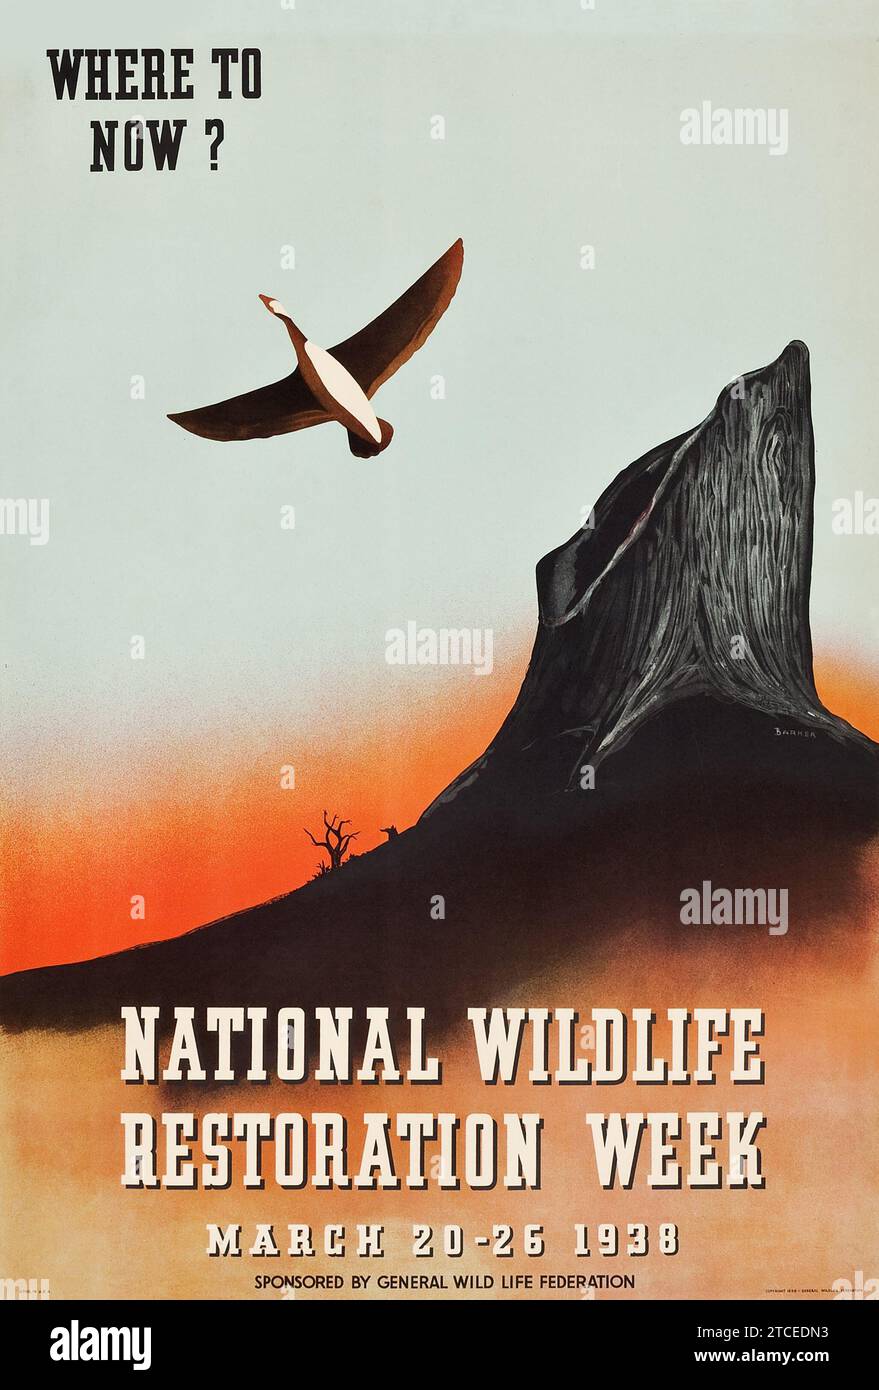 National Wildlife Restoration Week (General Wildlife Federation, 1938) Travel Poster - 'Where to Now?'. Stock Photo